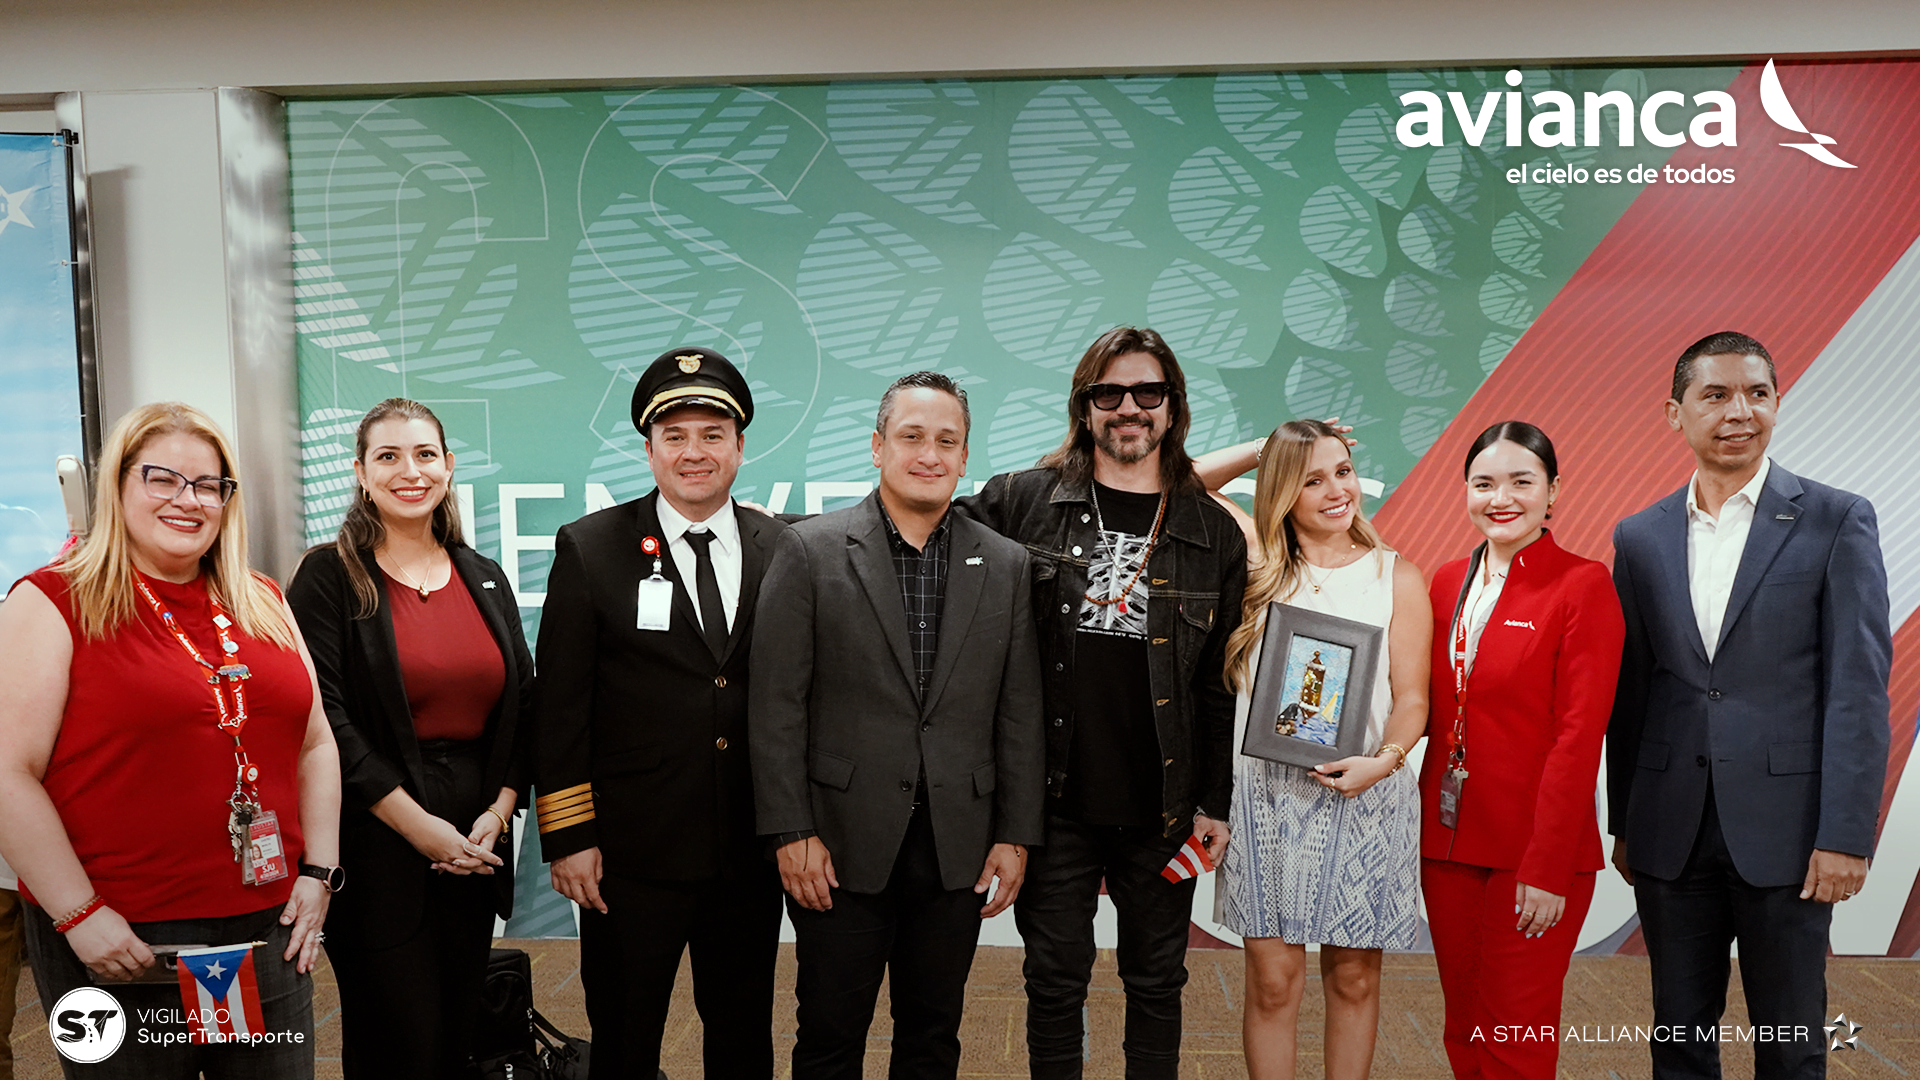 Avianca Airlines inaugurates direct flight connecting San Juan, P.R. to Medellin